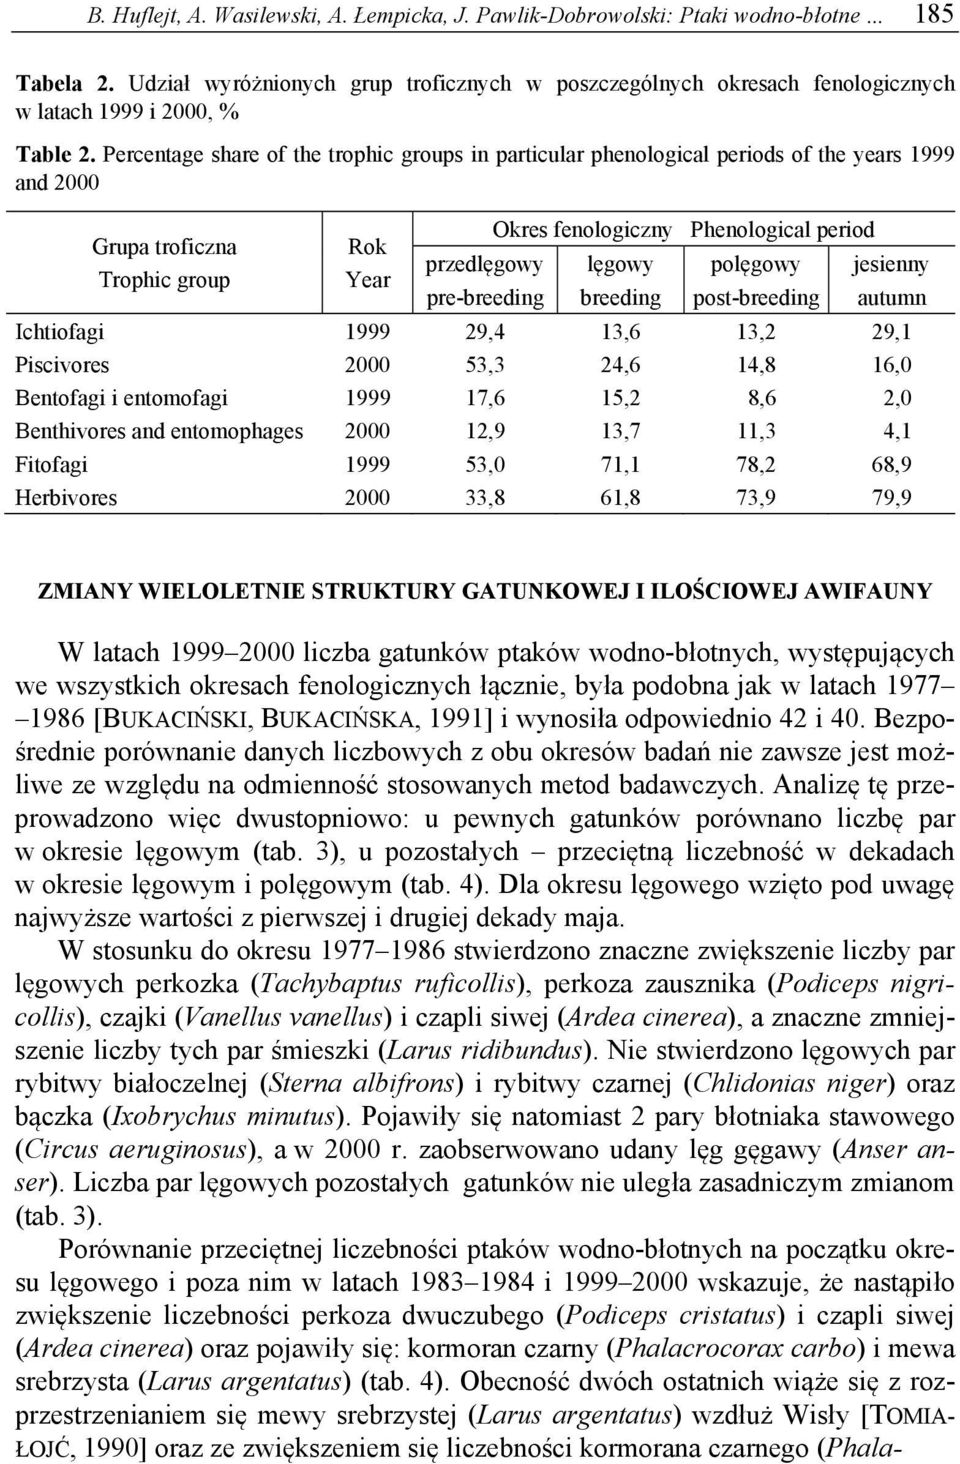 Percentage share of the trophic groups in particular phenological periods of the years 1999 and 2000 Grupa troficzna Trophic group Rok Year przedlęgowy pre-breeding Okres fenologiczny Phenological